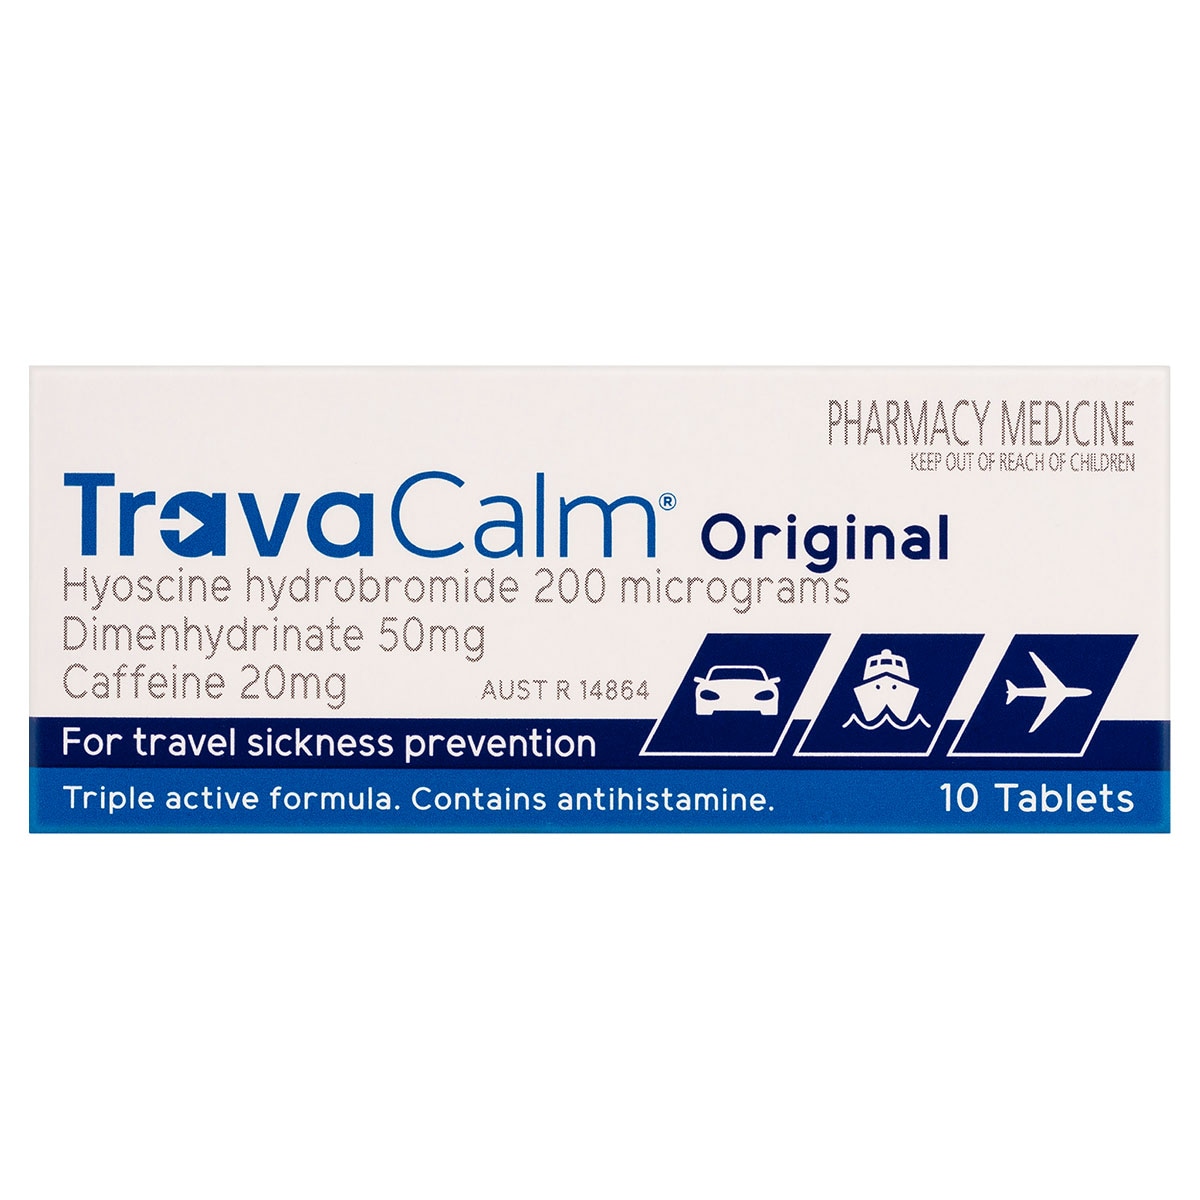 travel sickness tablets south africa